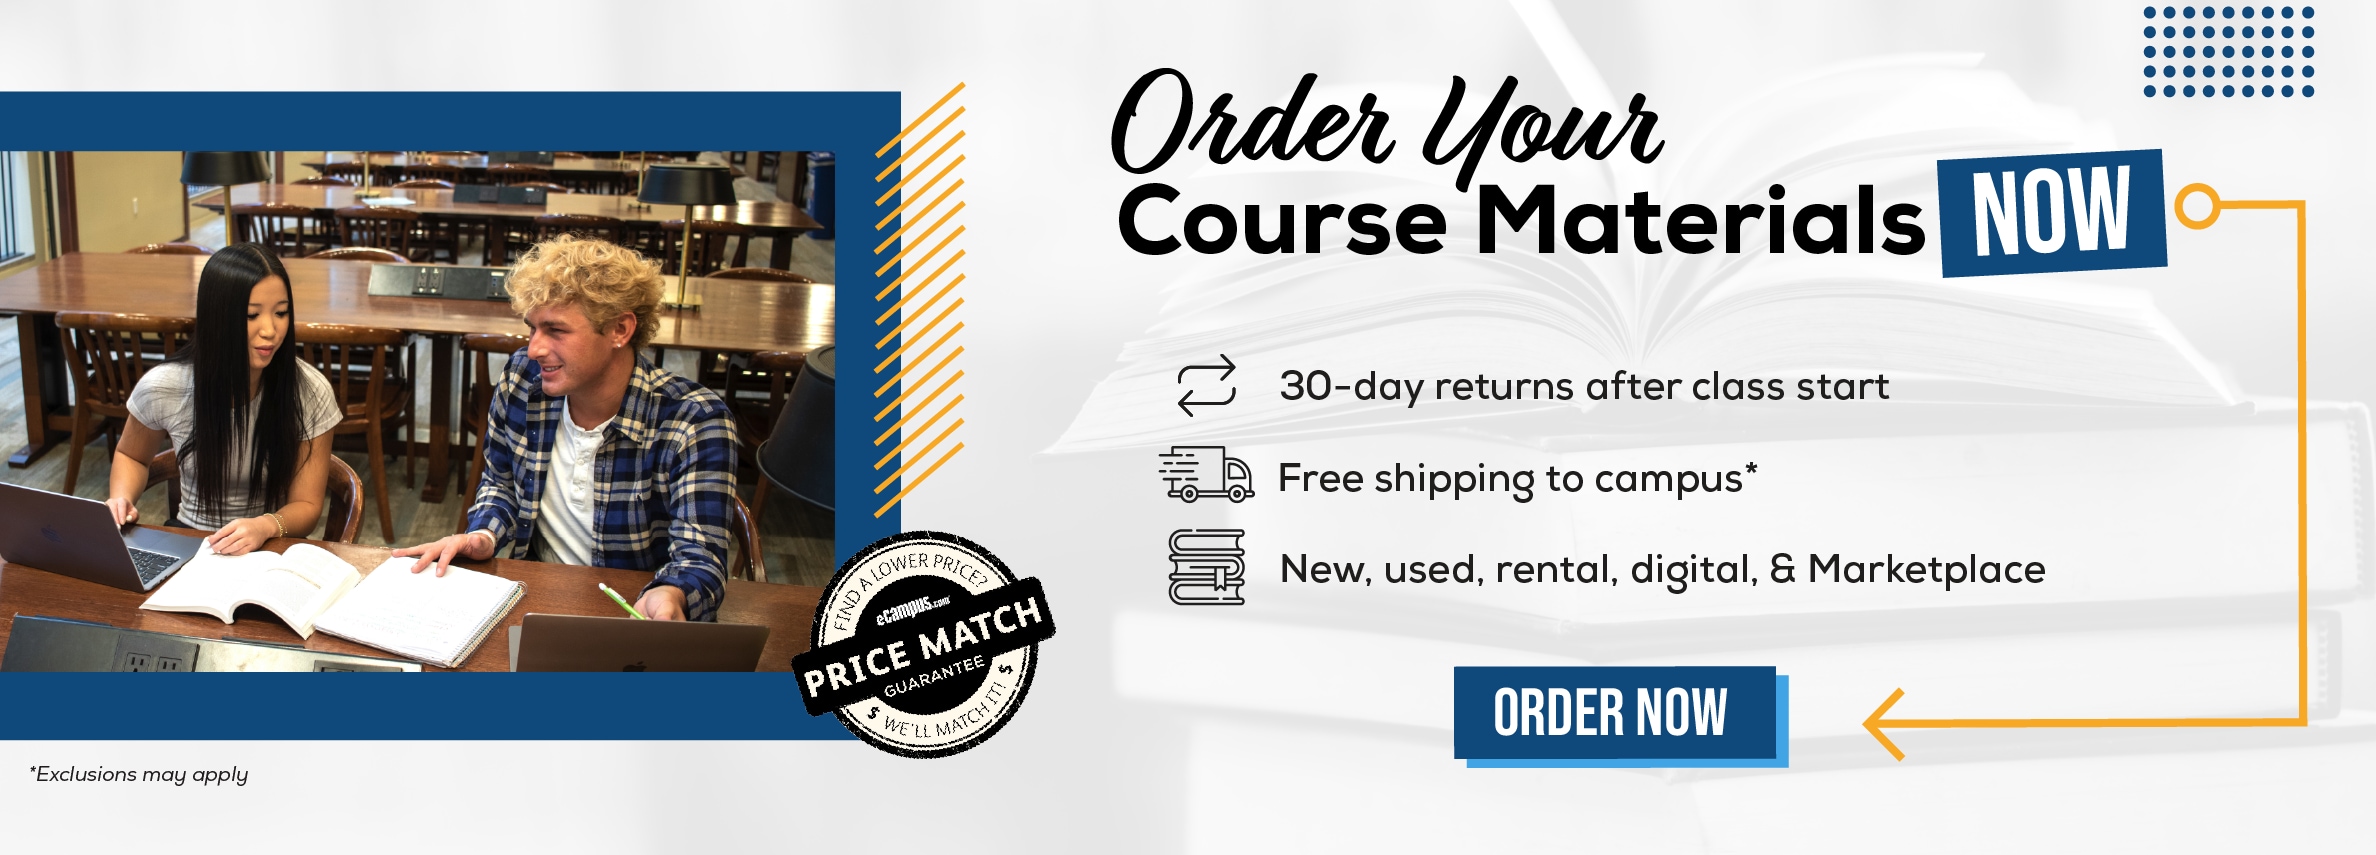 Order Your Course Materials Now. 30-day returns after class start. Free 2-day shipping to campus* New, used, rental, digital, & Marketplace. Order now. *Exclusions may apply.